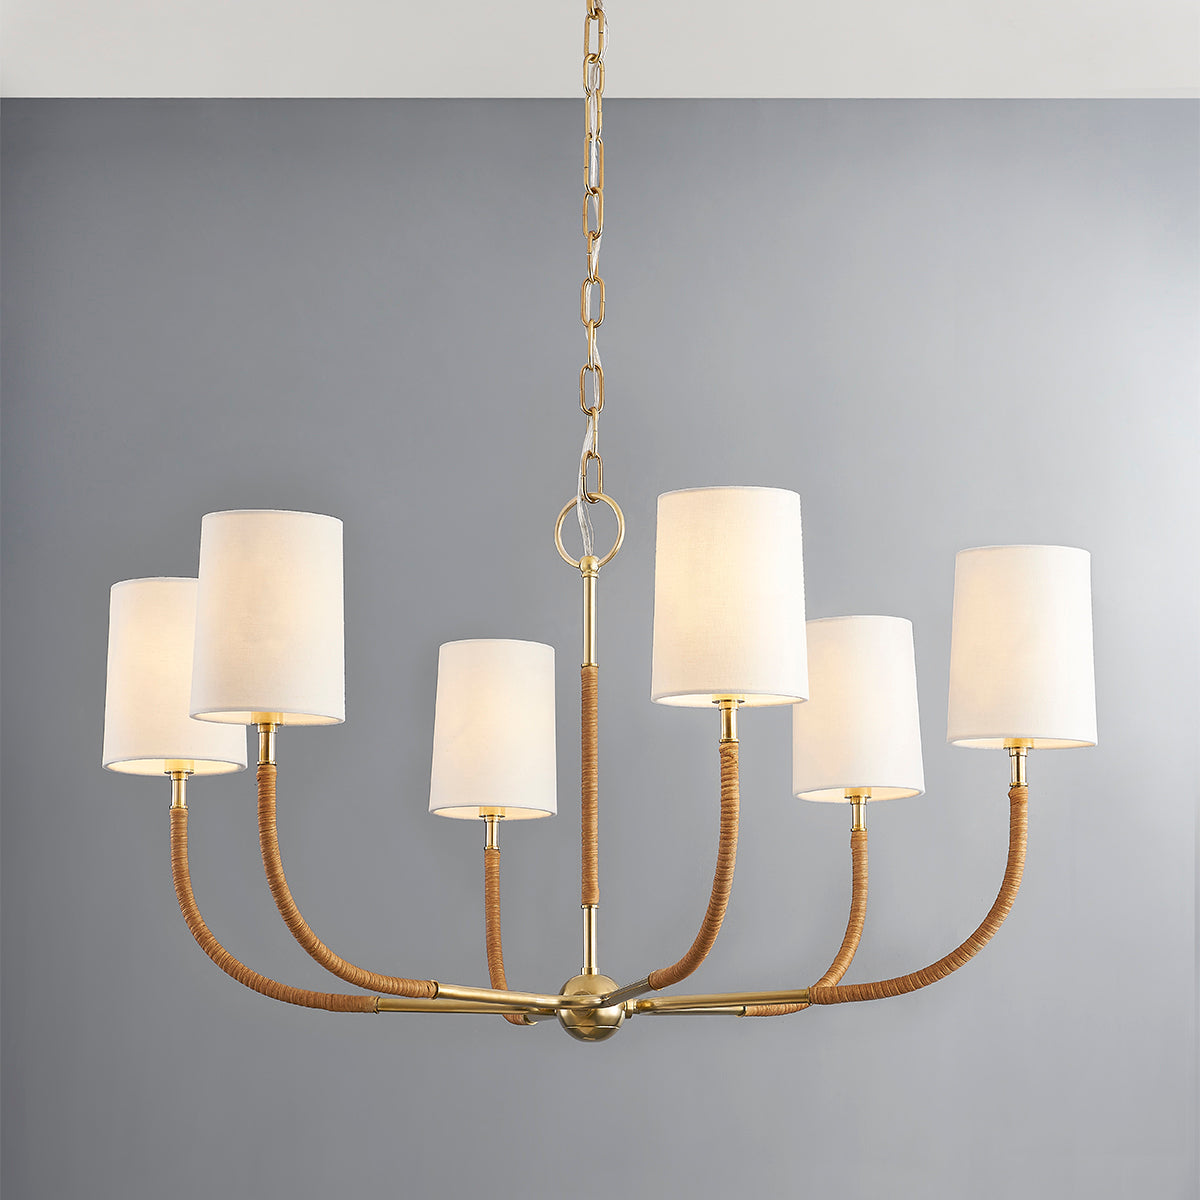 Aged Brass Wrapped with Natural Rattan Curve Arm with Linen White Shade Chandelier